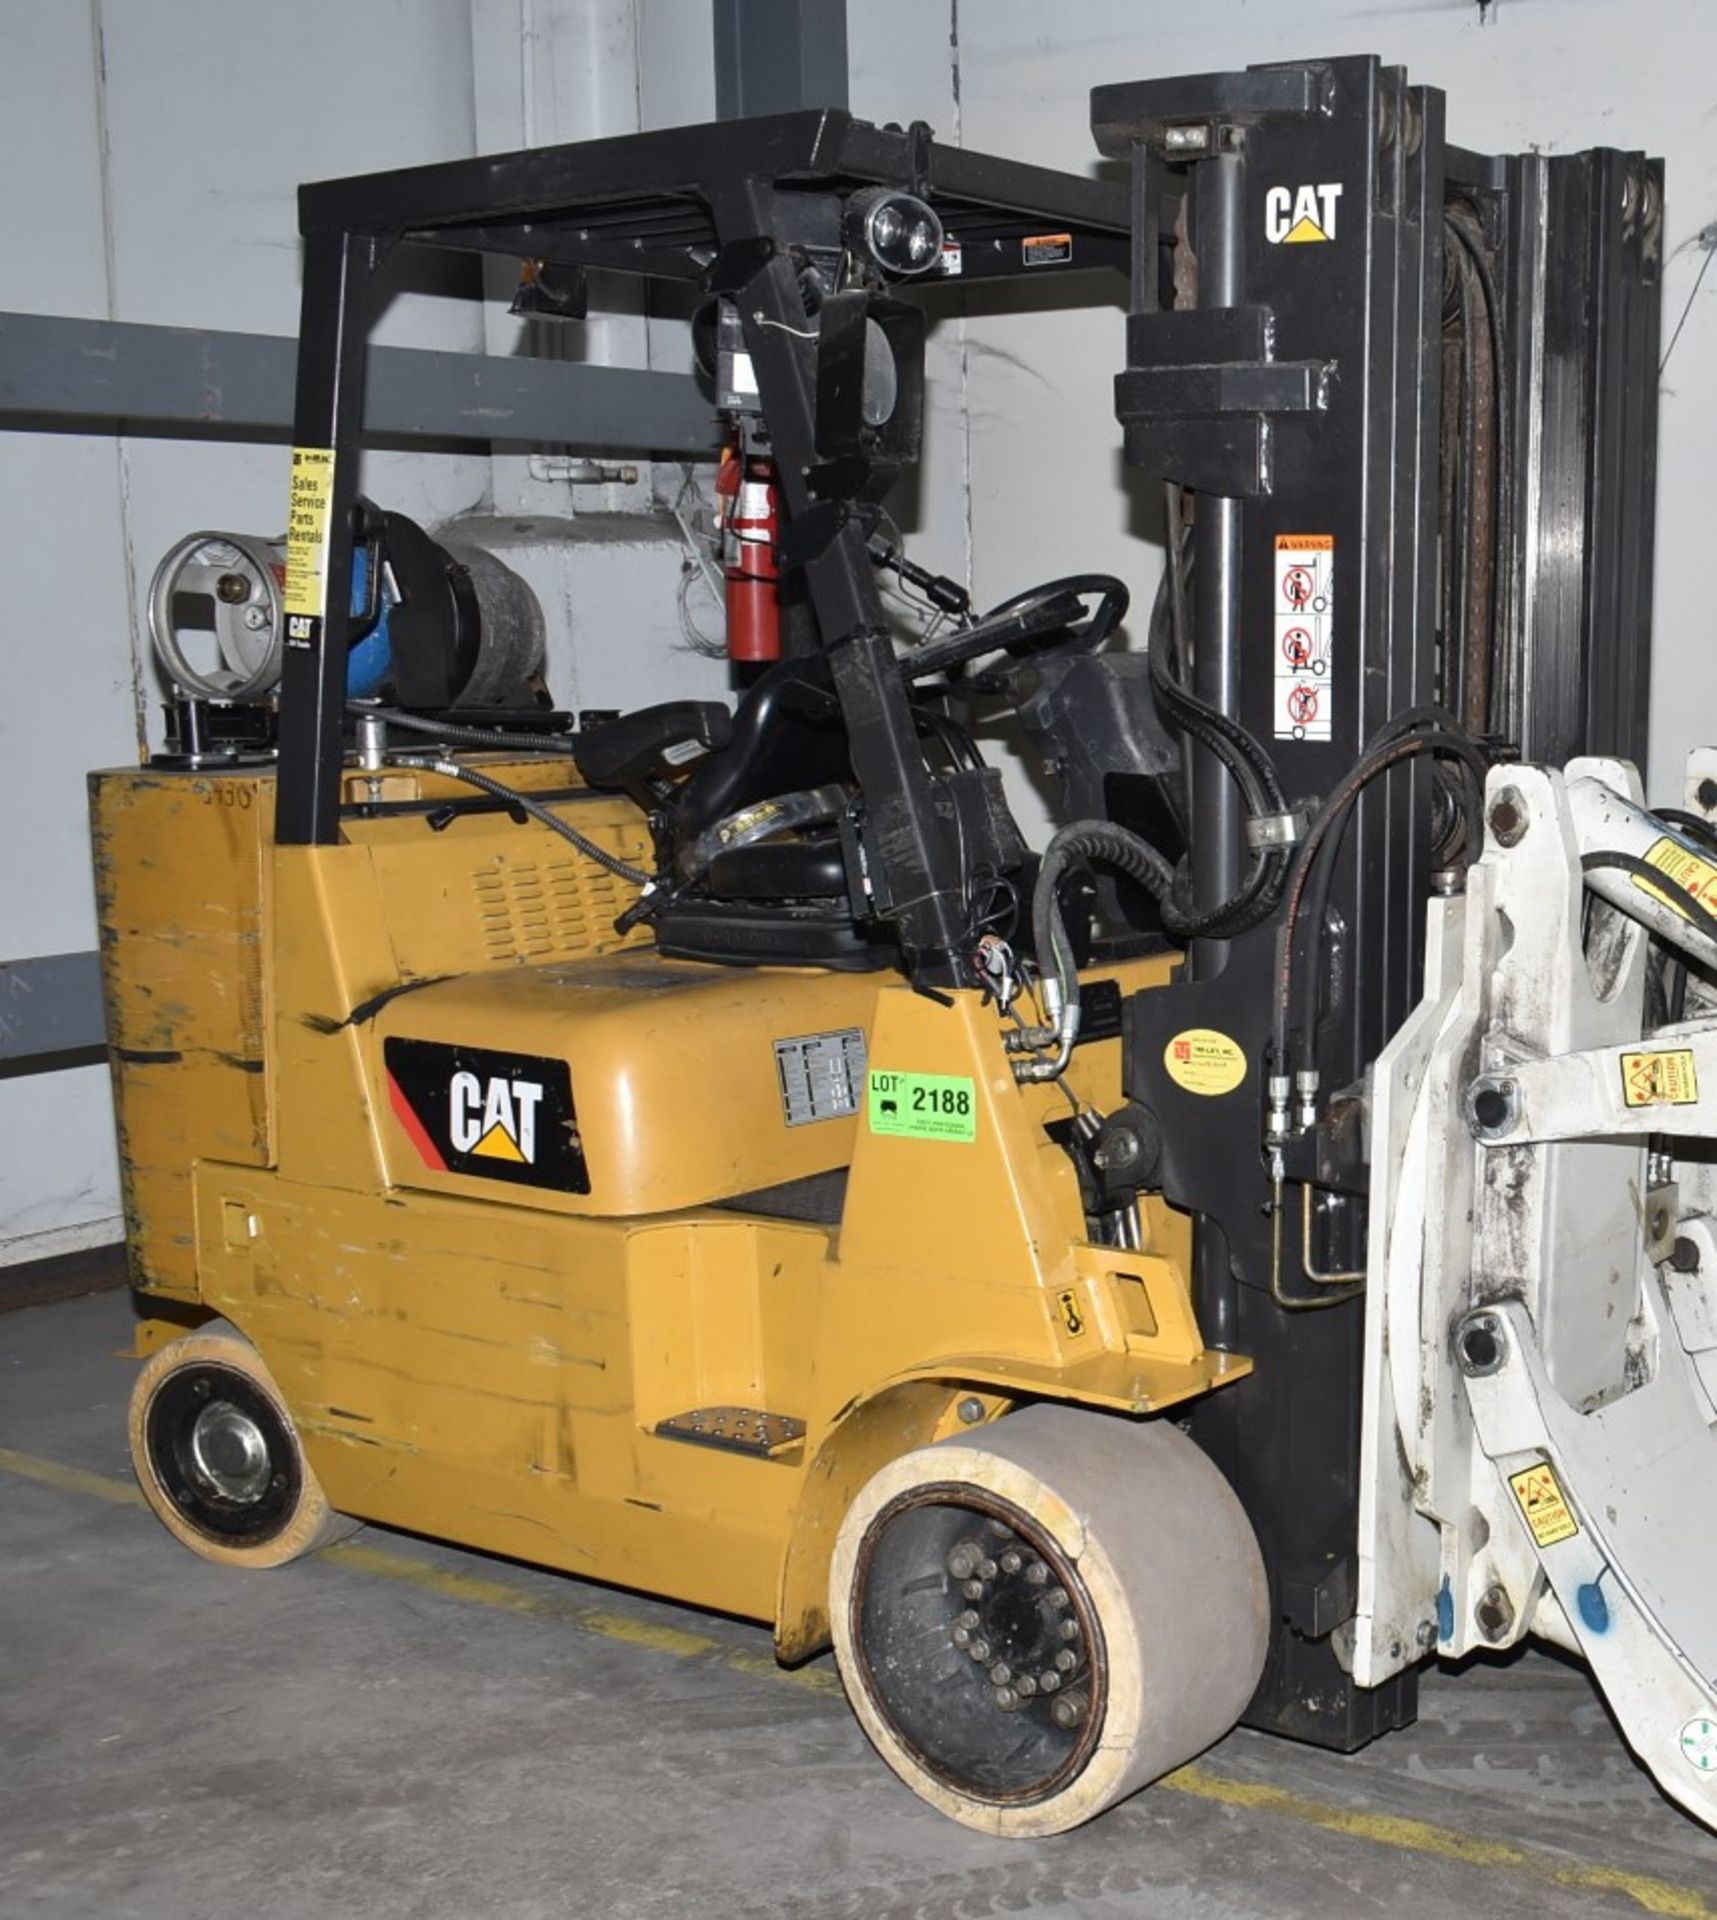 CATERPILLAR (2013) GC55KPRSTR 7,000 LBS. CAPACITY LPG FORKLIFT WITH 172" MAX VERTICAL REACH, 3-STAGE